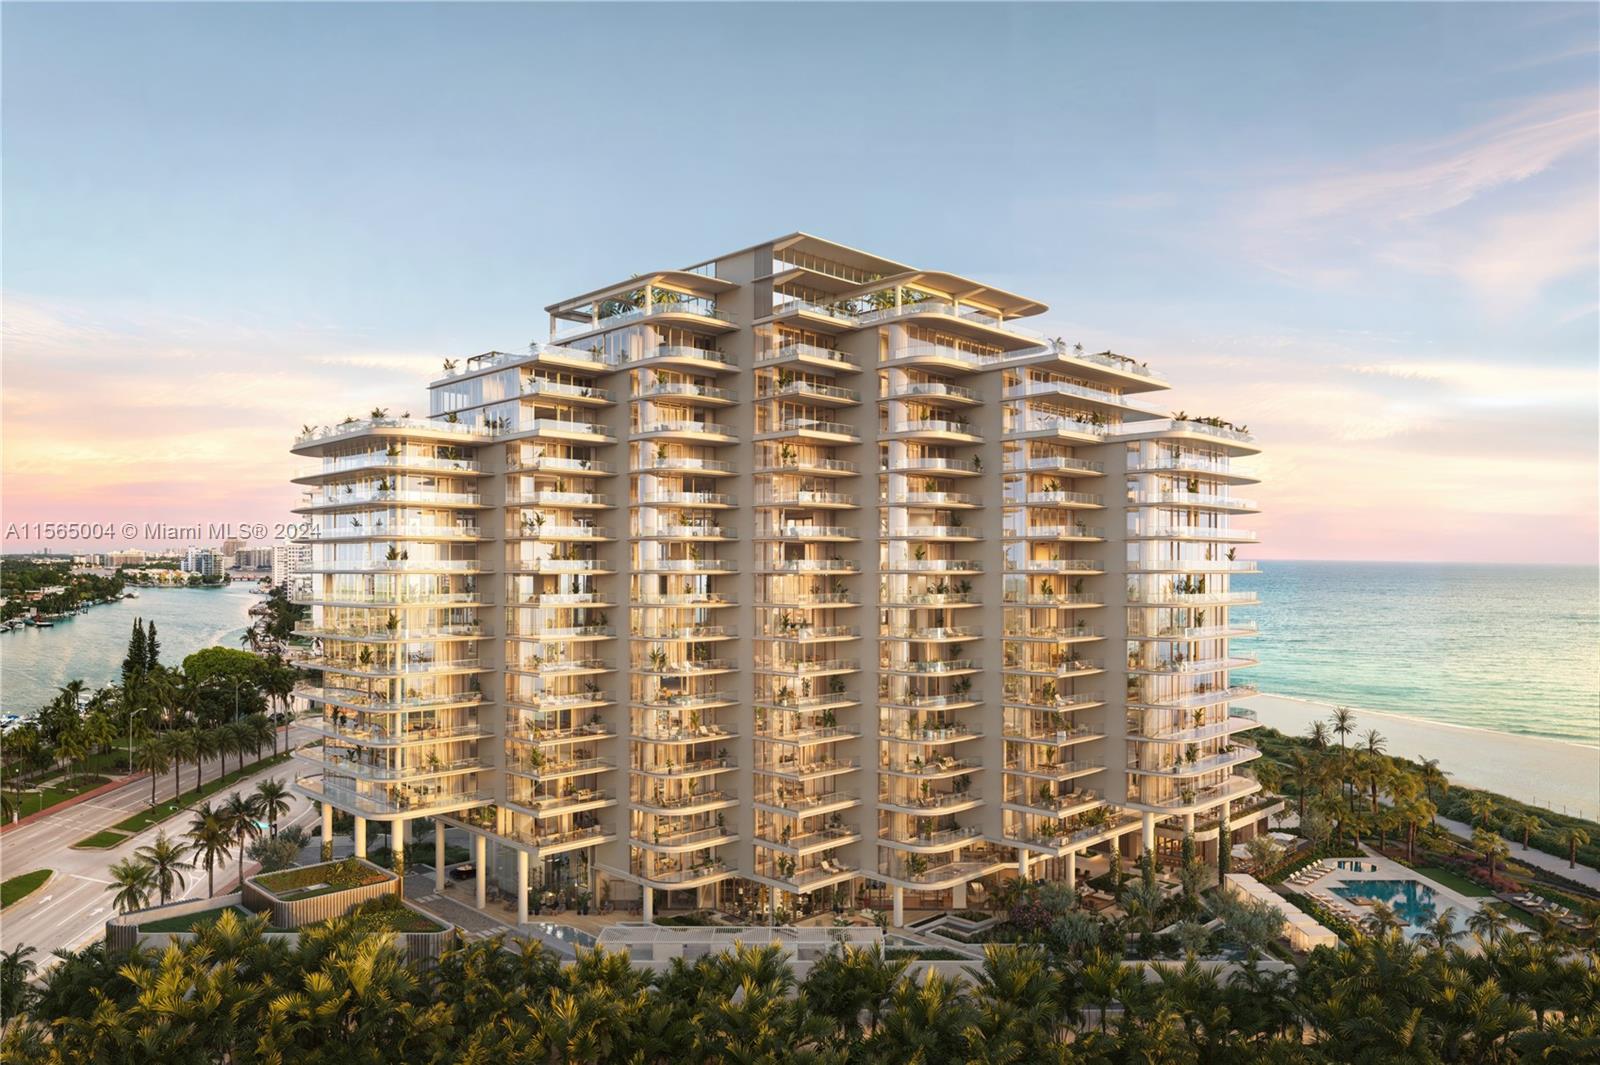 Rising from the most peaceful and expansive stretch of sand on Miami Beach’s coastline, The Perigon is an unprecedented collaboration between three global design icons. The rare seclusion, matchless amenities, and impeccable service of this unique private enclave promises residents an exclusive Miami Beach lifestyle.This Bay & Ocean 4 bedroom residence with over 4784SF of living space and 2334SF of terraces makes this one of the best options on the market. Buyer chooses - Kitchen cabinets, flooring options, closets installed - Developer inventory is subject to change based on activity of sales. Gas cooking, Wolf & SubZero appliance, stone countertops Parking is self park or valet park (owners choice) - Contact the Sales Gallery to learn more about the finest new building in Miami Beach.